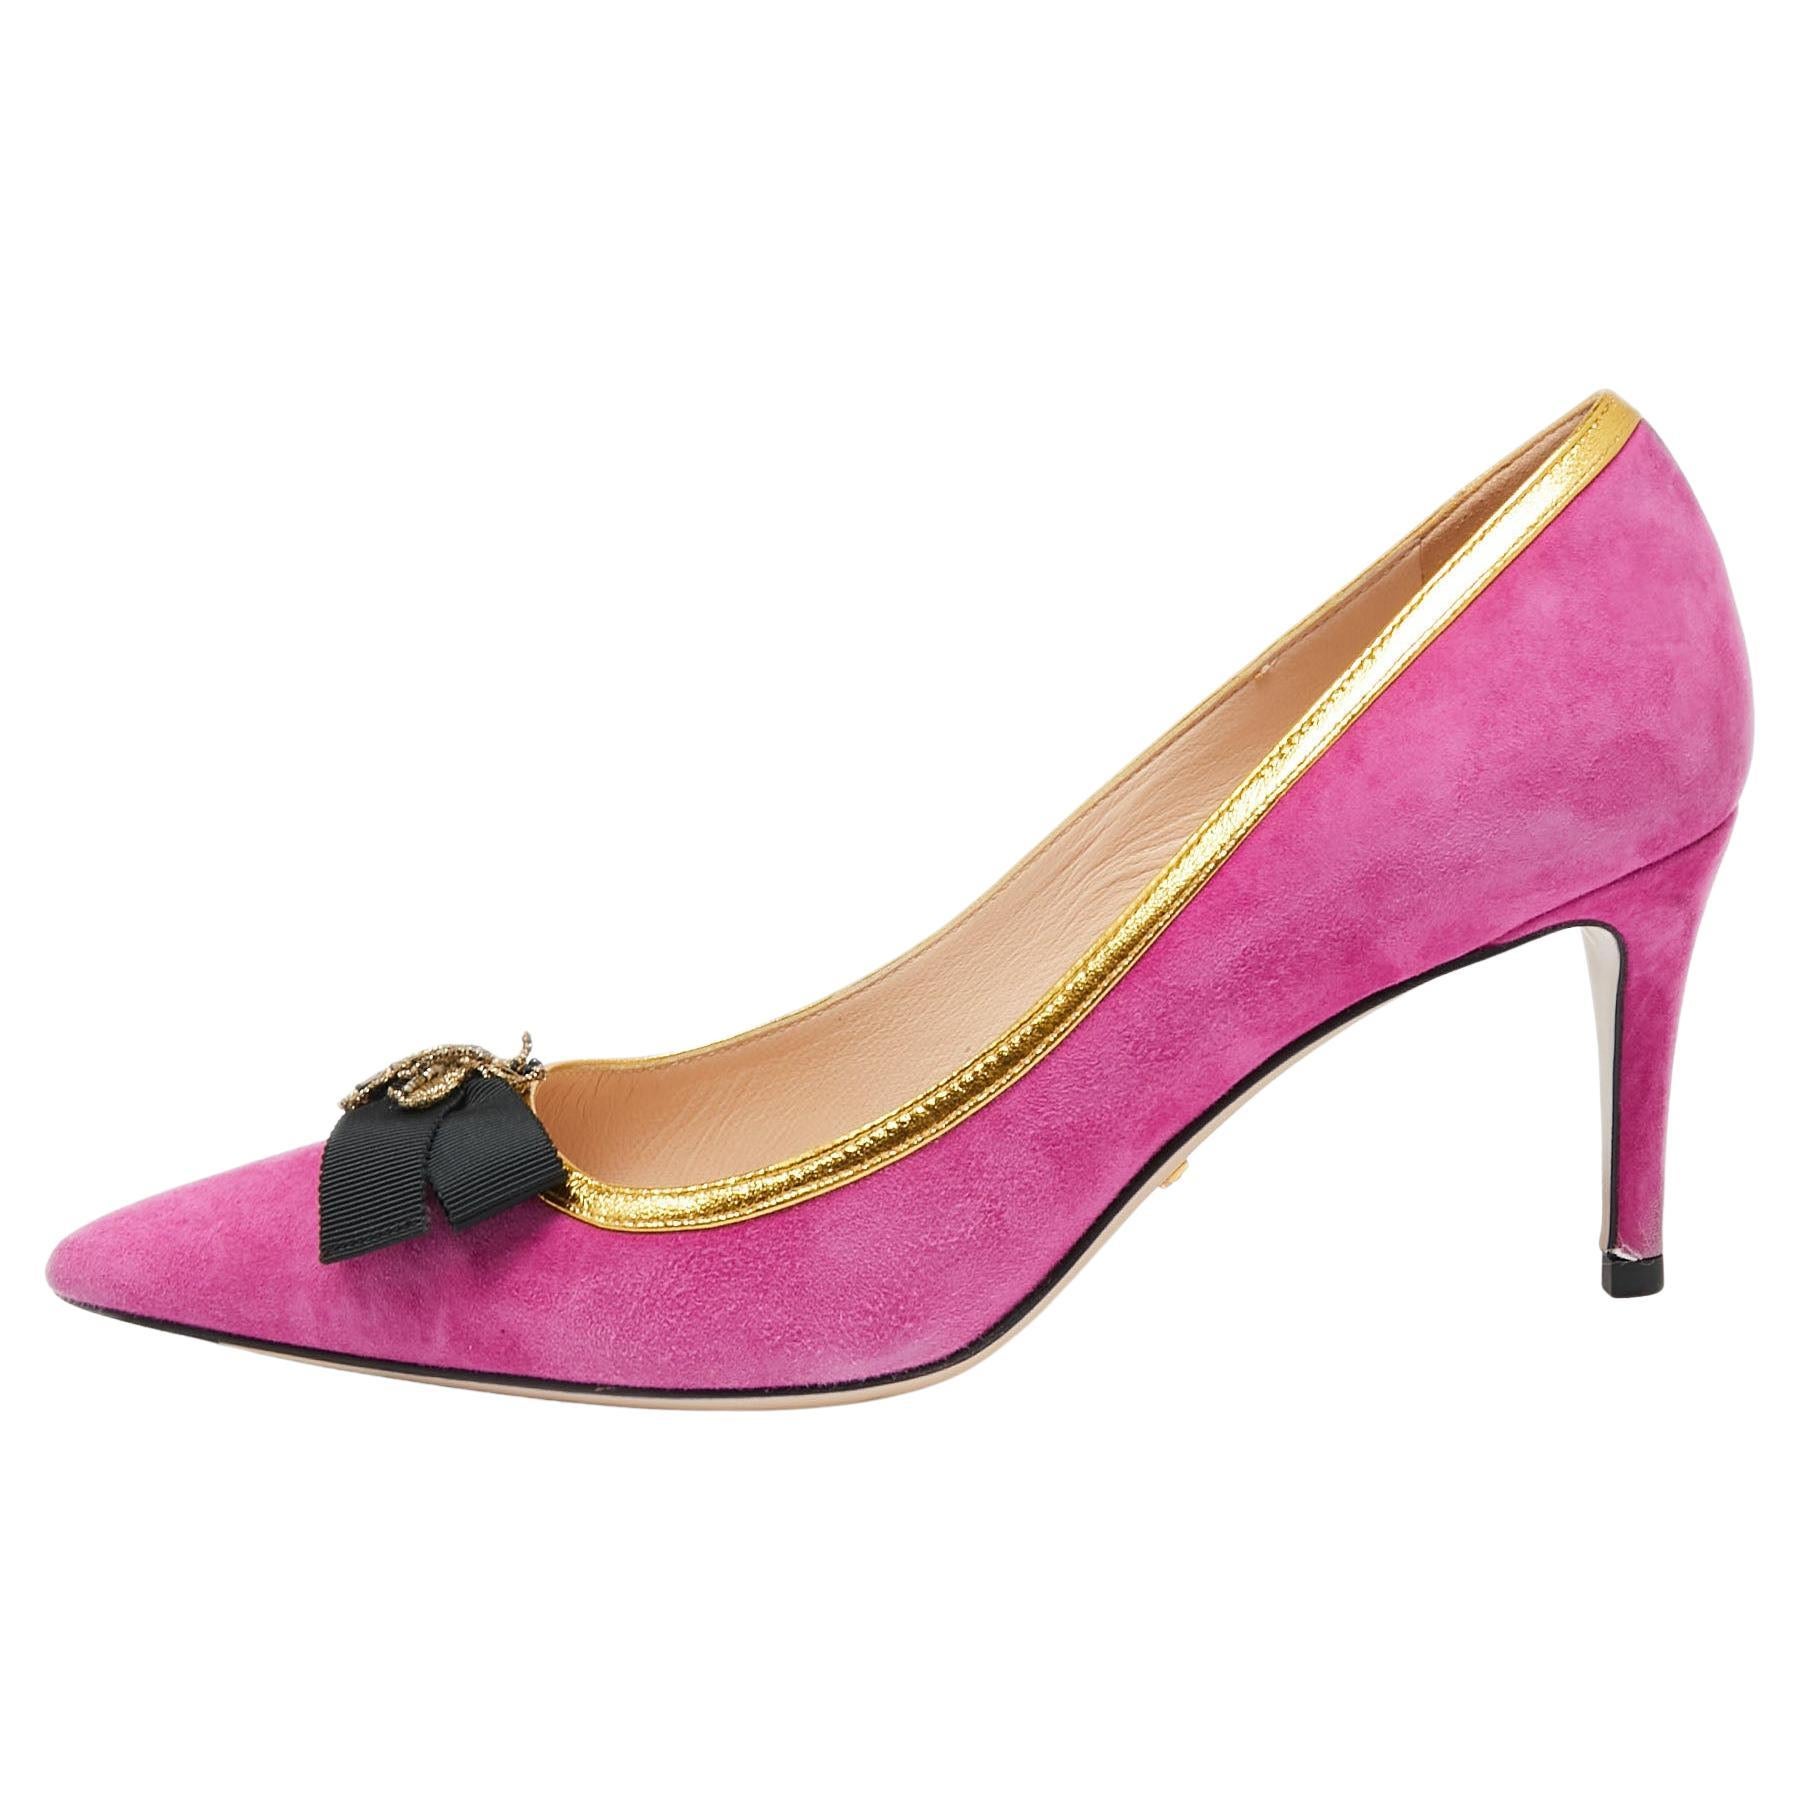 Gucci Magenta/Gold Suede and Leather Moody Bee Pointed-Toe Pumps Size 35.5